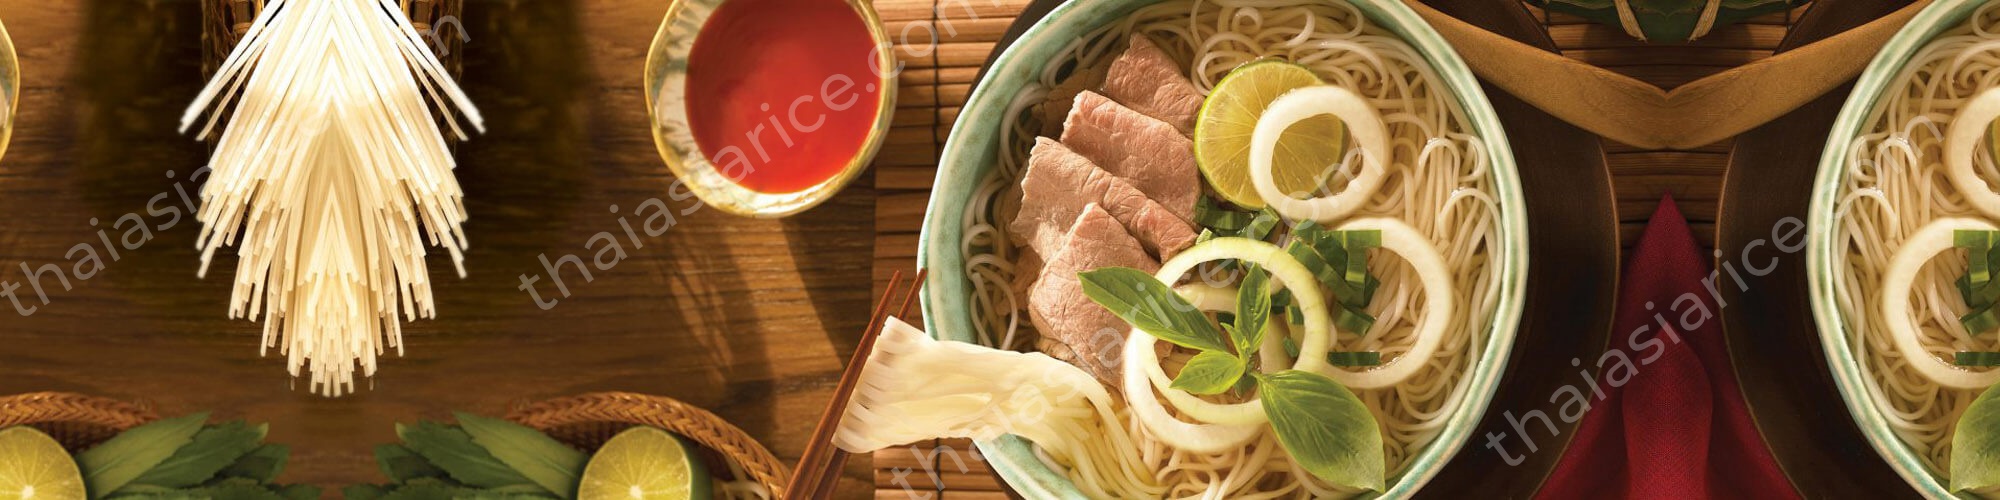 Traditional Row Rice Noodle, Straight-cut Rice Noodles, Rice noodles & Rice Sticks | Thai Asia Rice Co., Ltd.,